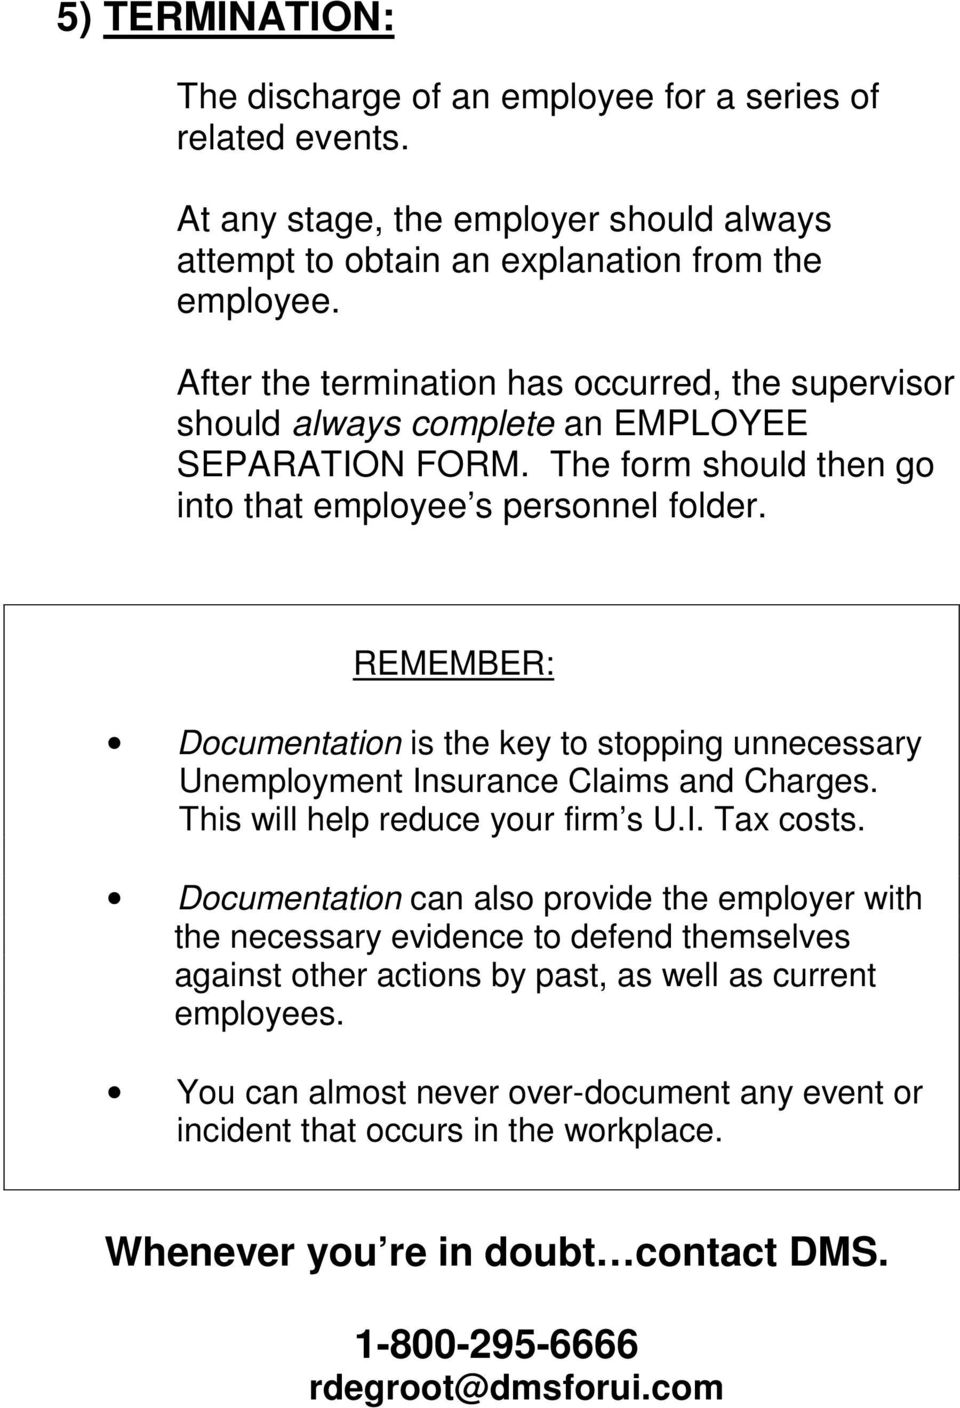 REMEMBER: Documentation is the key to stopping unnecessary Unemployment Insurance Claims and Charges. This will help reduce your firm s U.I. Tax costs.